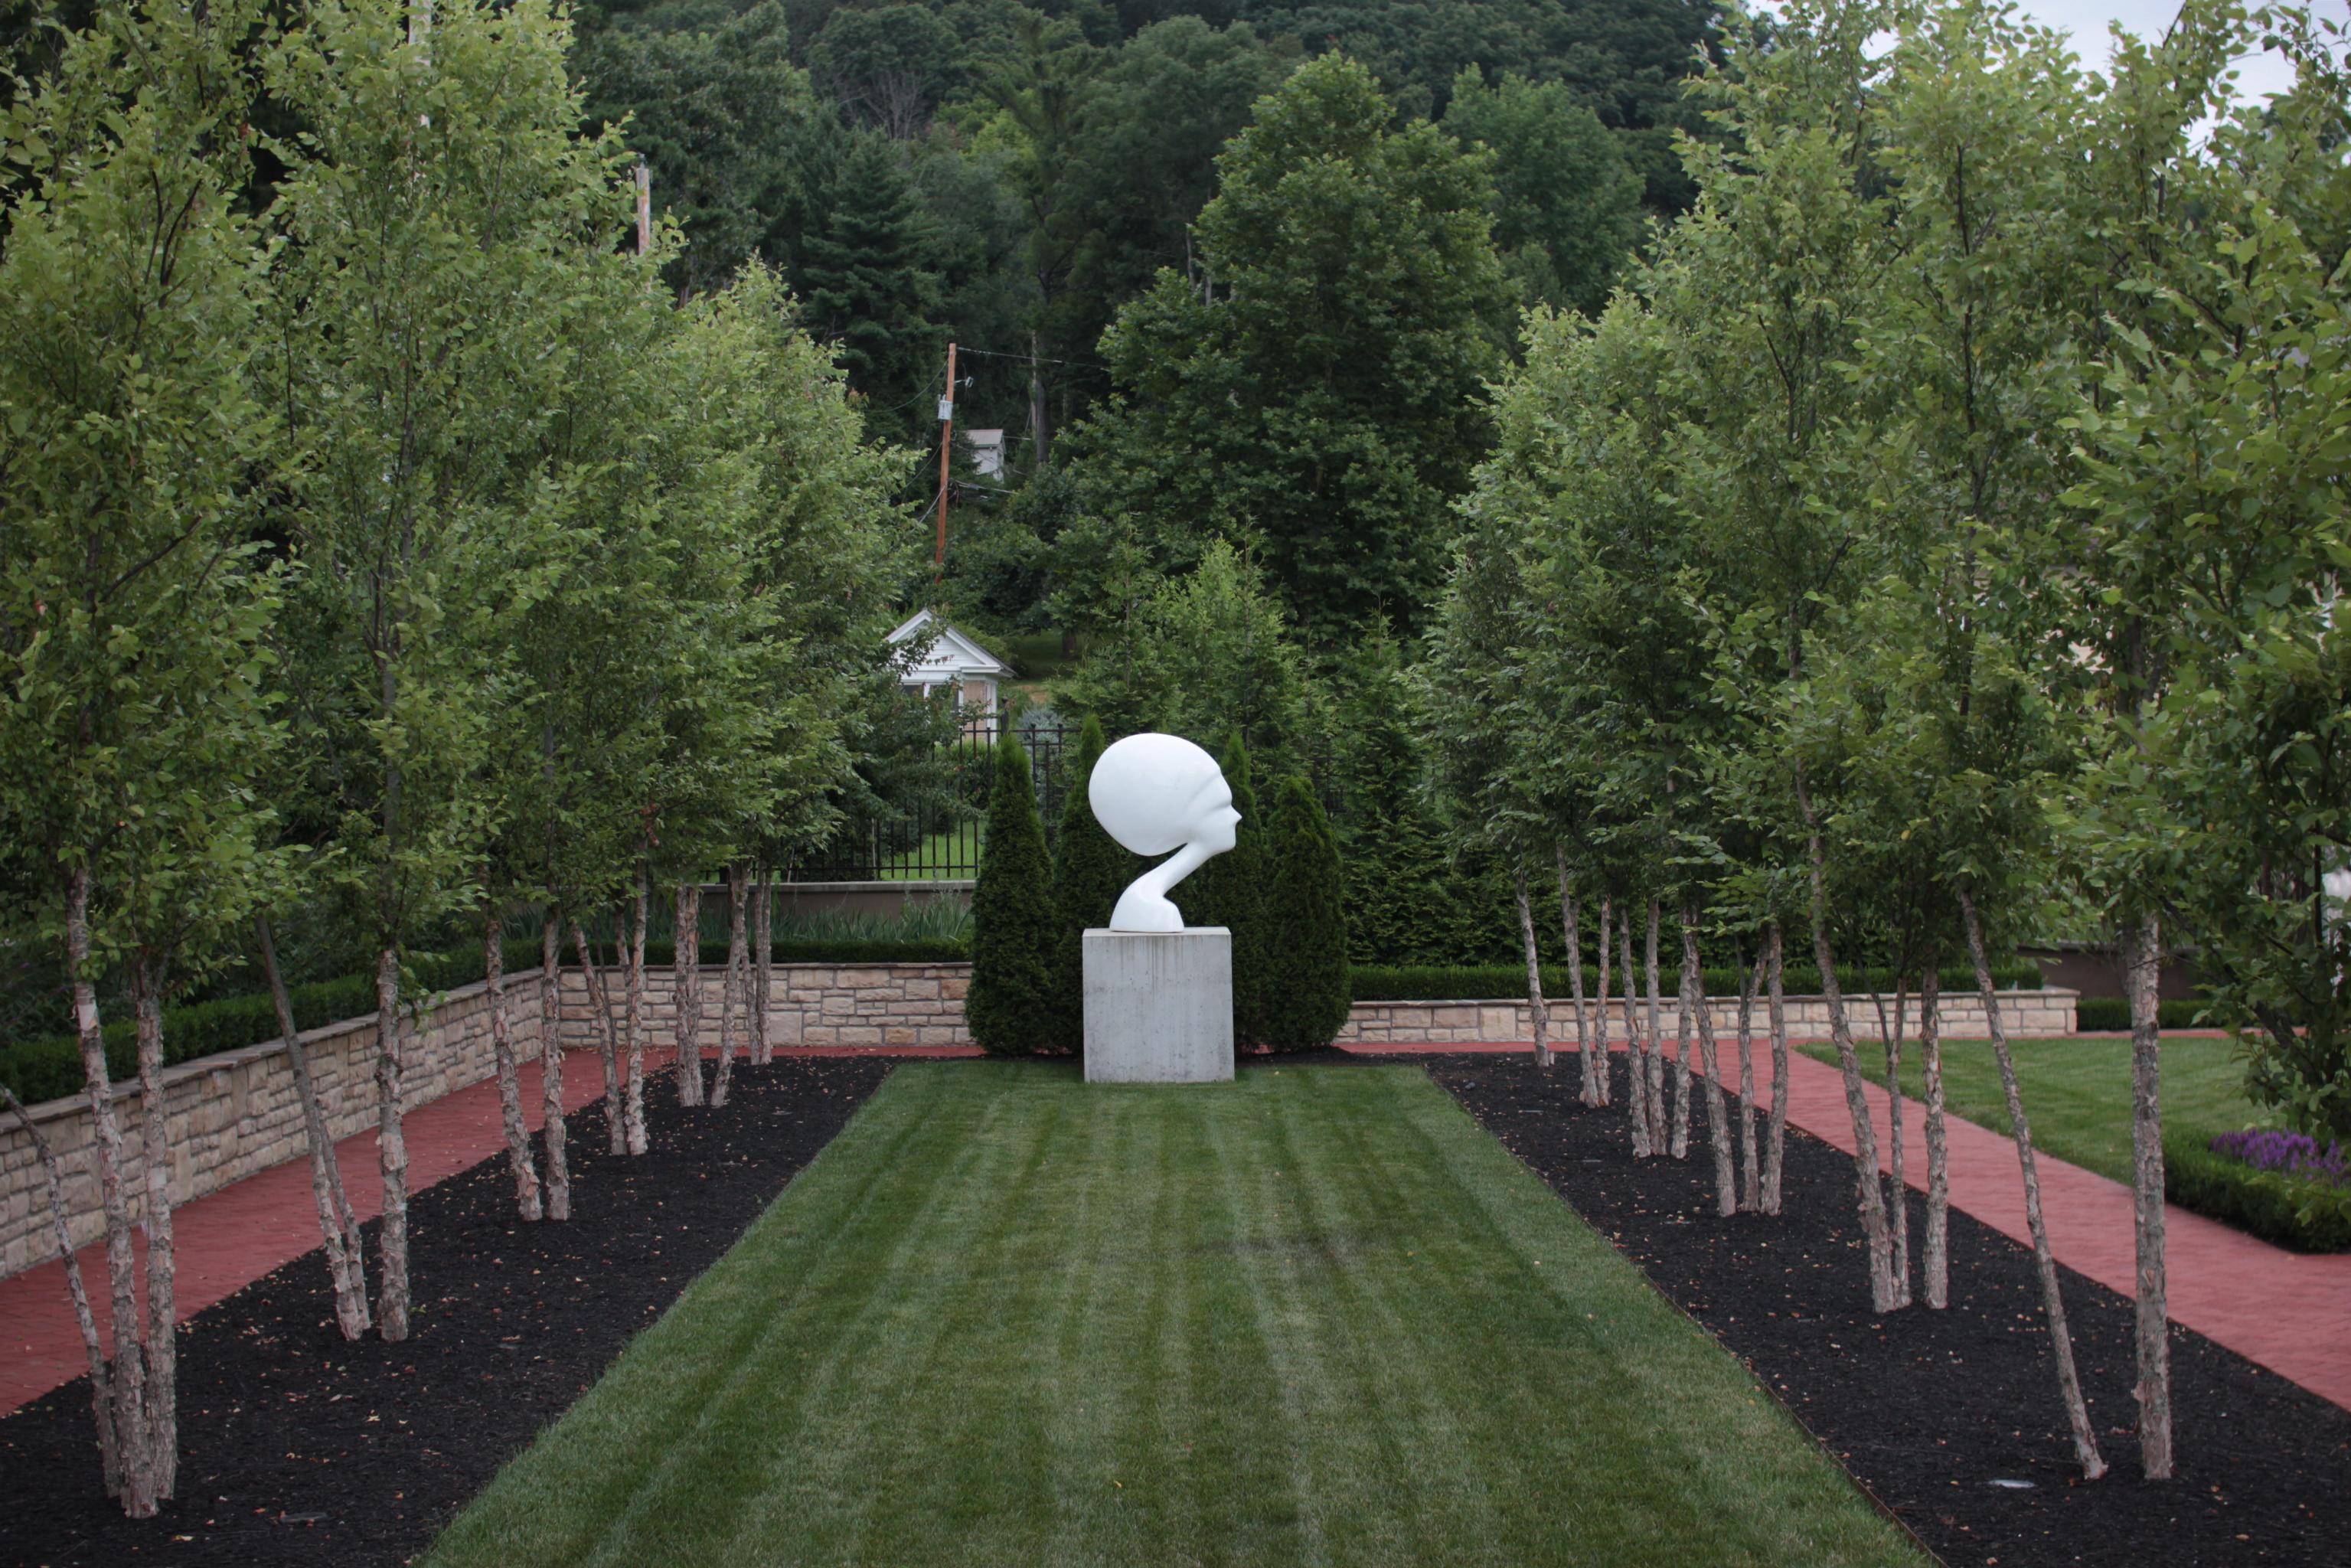 photo of a head sculpture at the end of a strip of grass, between two rows of trees